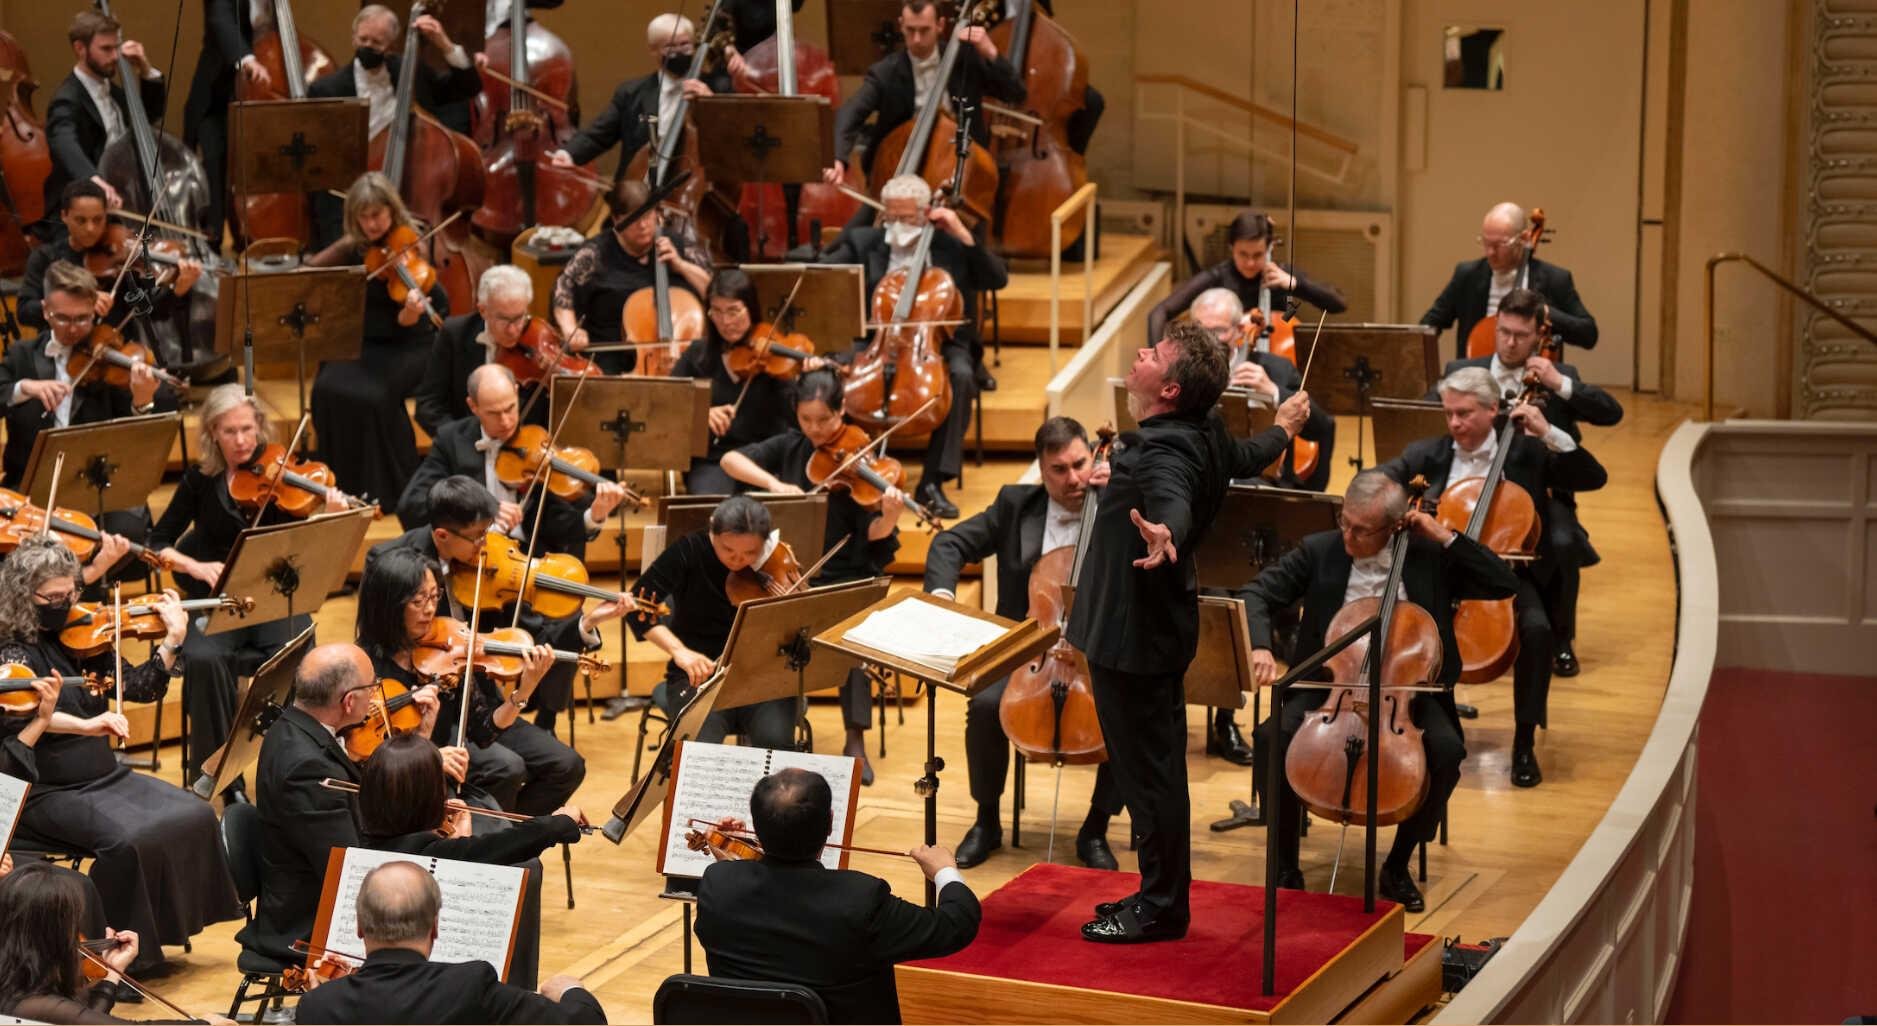 Guest conductor Jakub Hrůša leads the Chicago Symphony Orchestra in a performance of Mahler’s Symphony No. 9. (Todd Rosenberg)